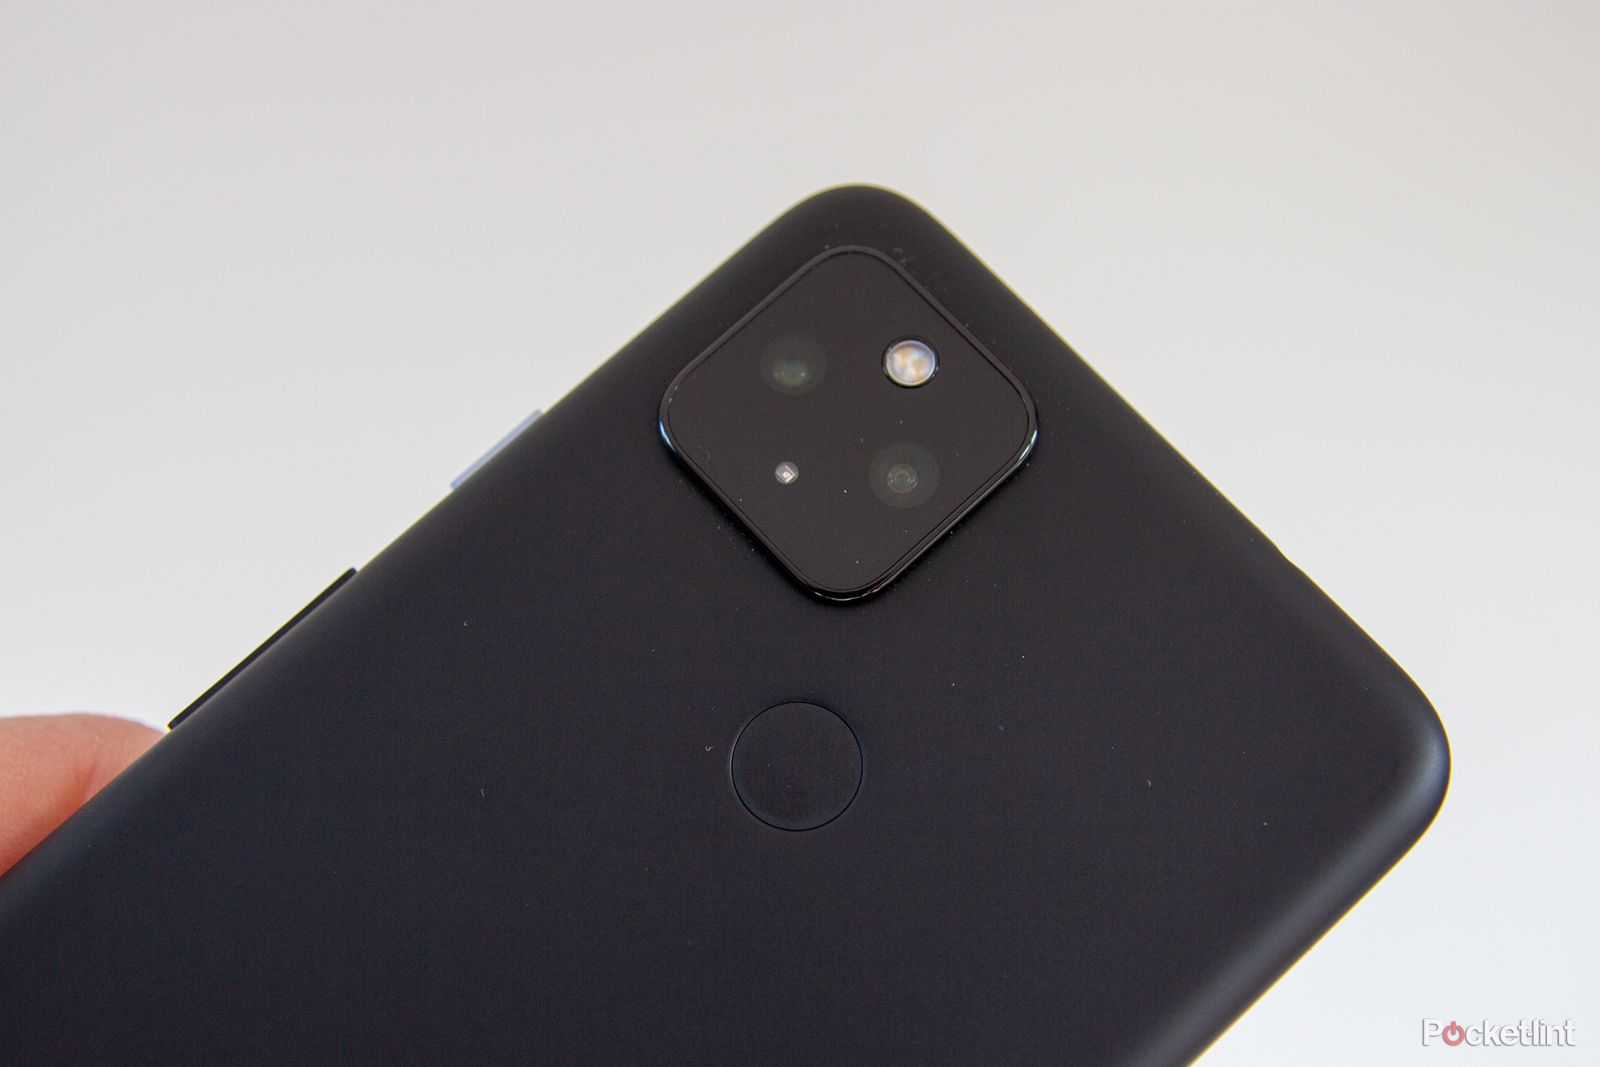 Pixel 6 could rival iPhone 12 by offering UWB connectivity photo 1